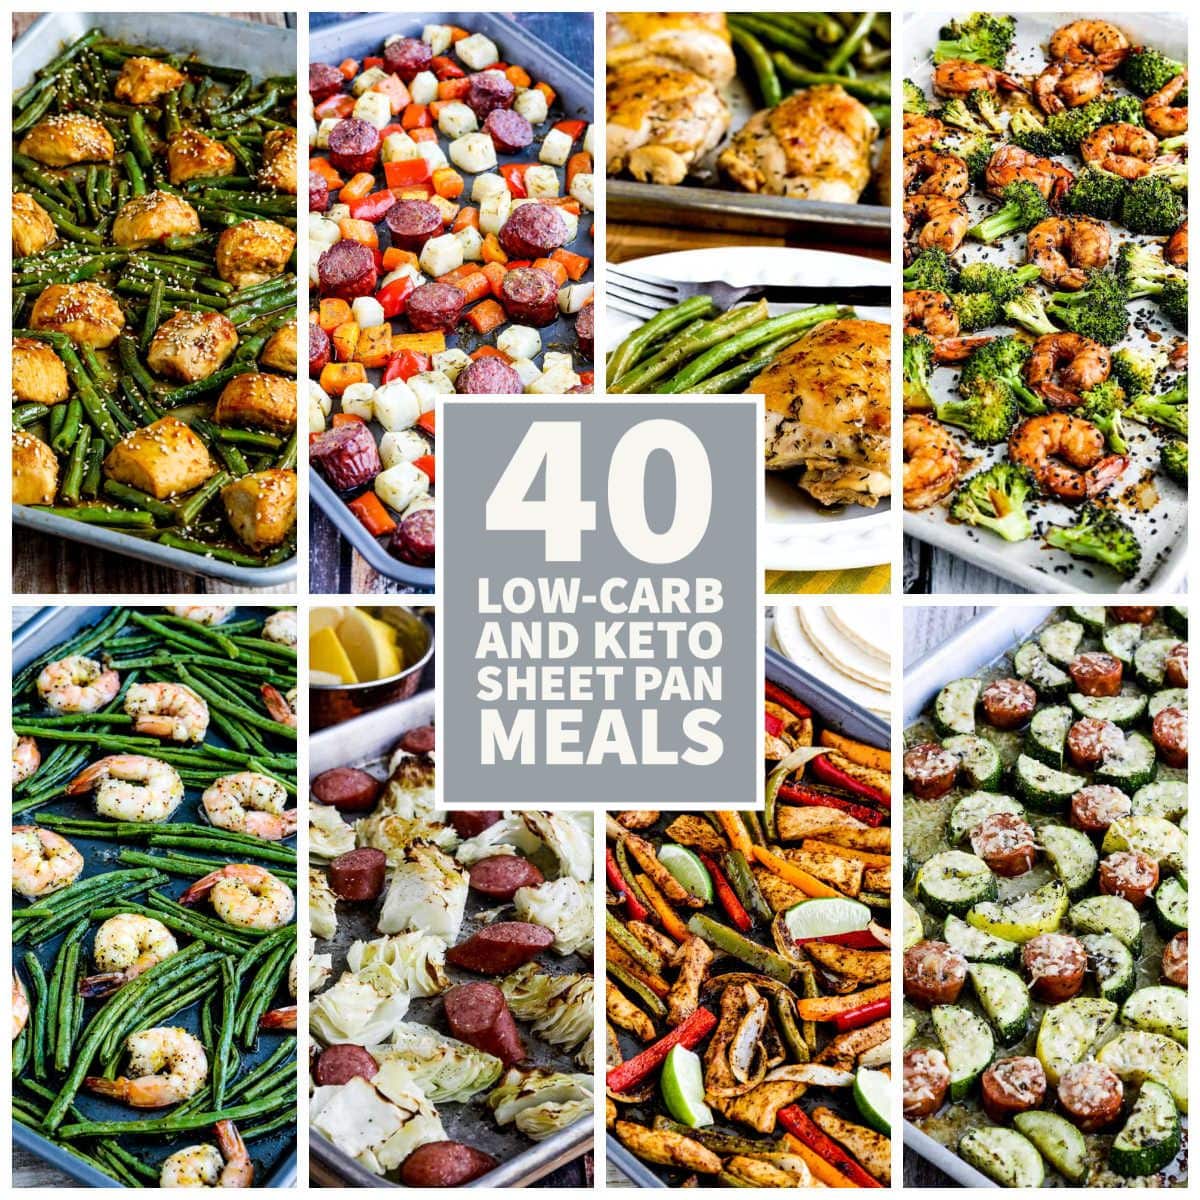 Collage of 40 Low-Carb and Keto Sheet Pan Meals showing featured recipes